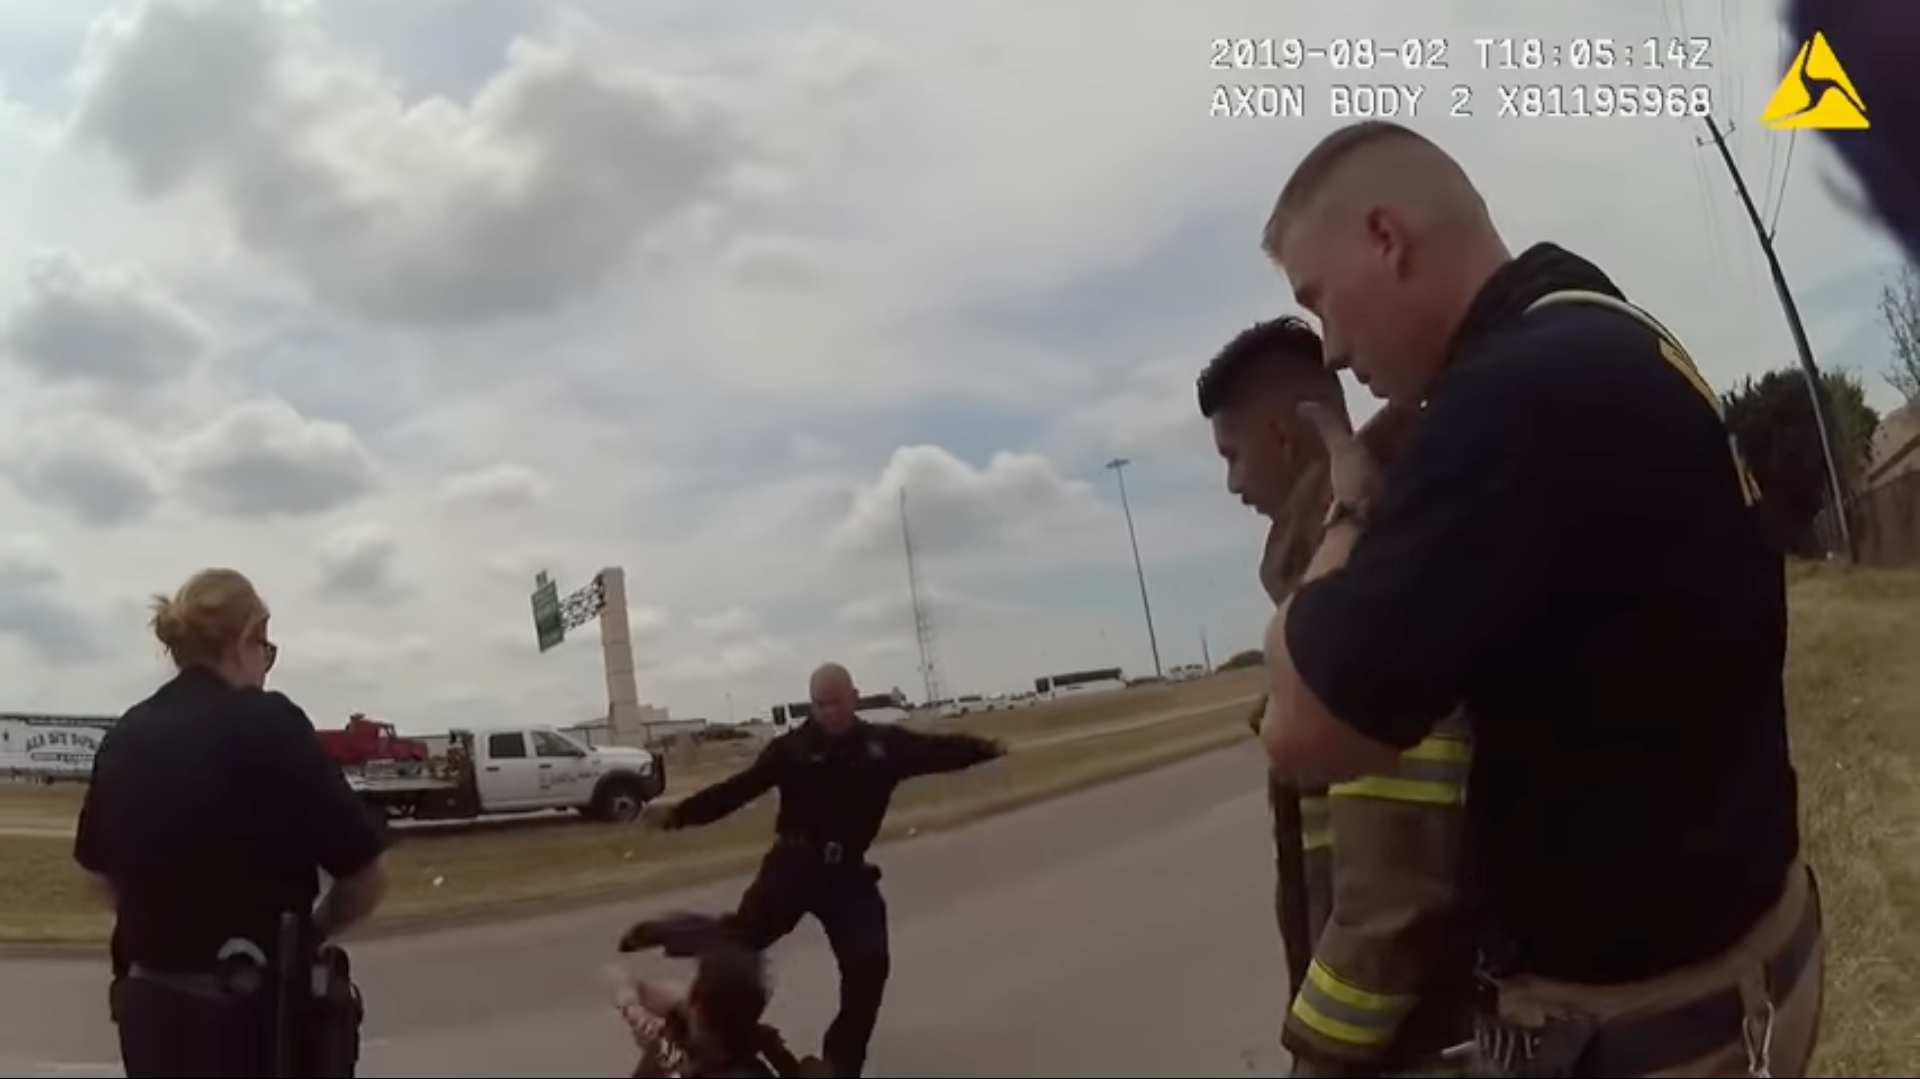 Dallas Fire-Rescue responders stood over Kyle Vess before the incident took place